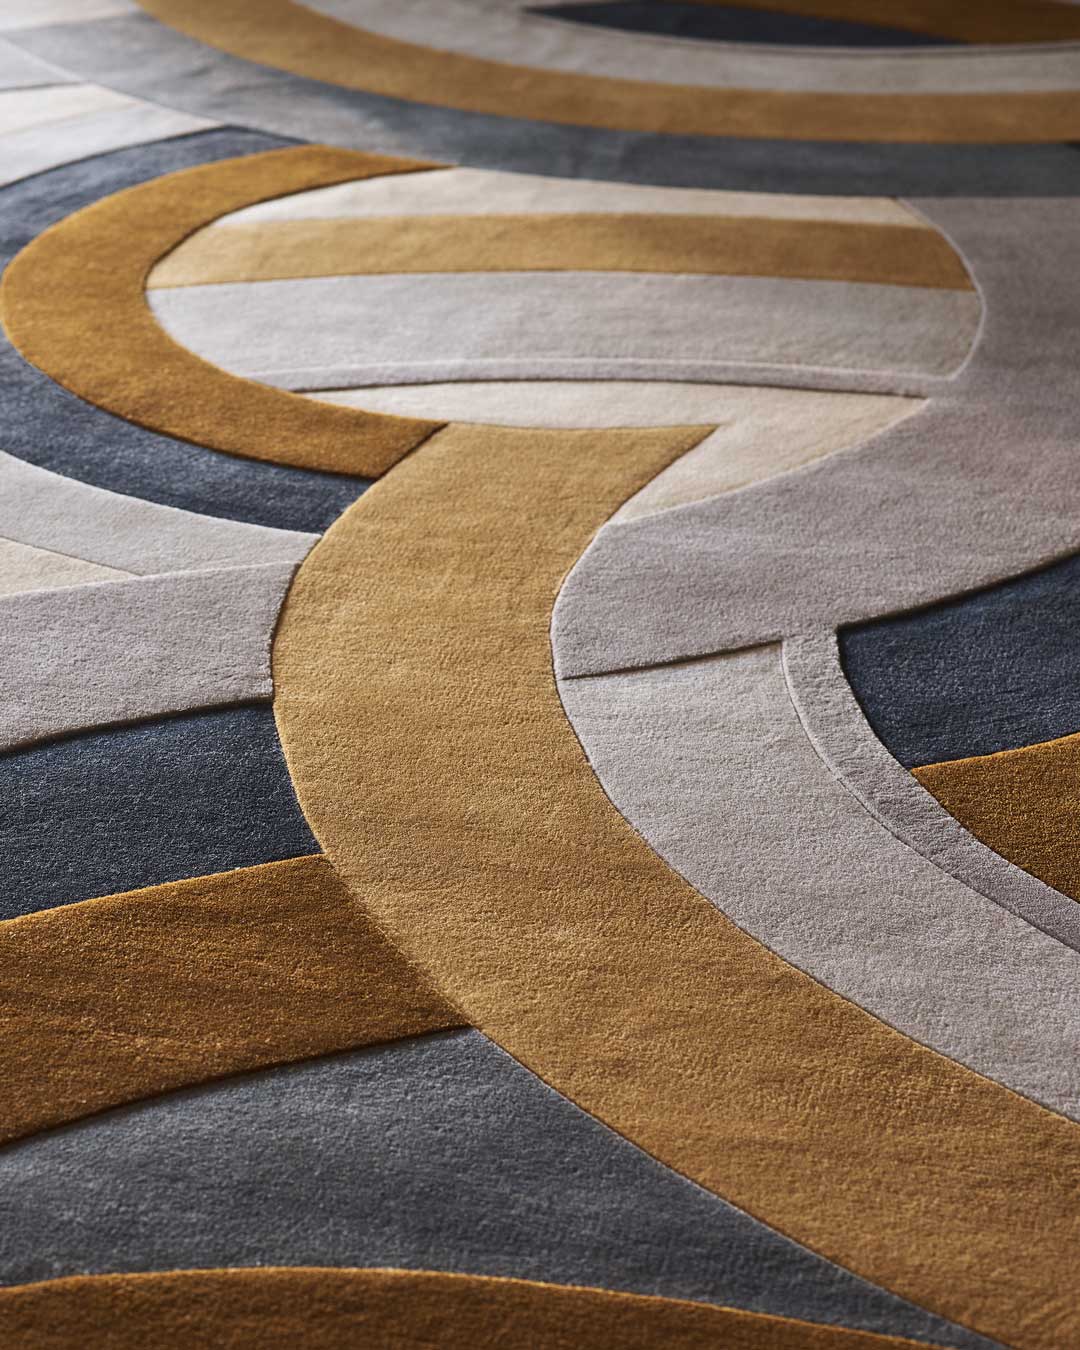 close up of Ruhlmann rug by Greg Natale